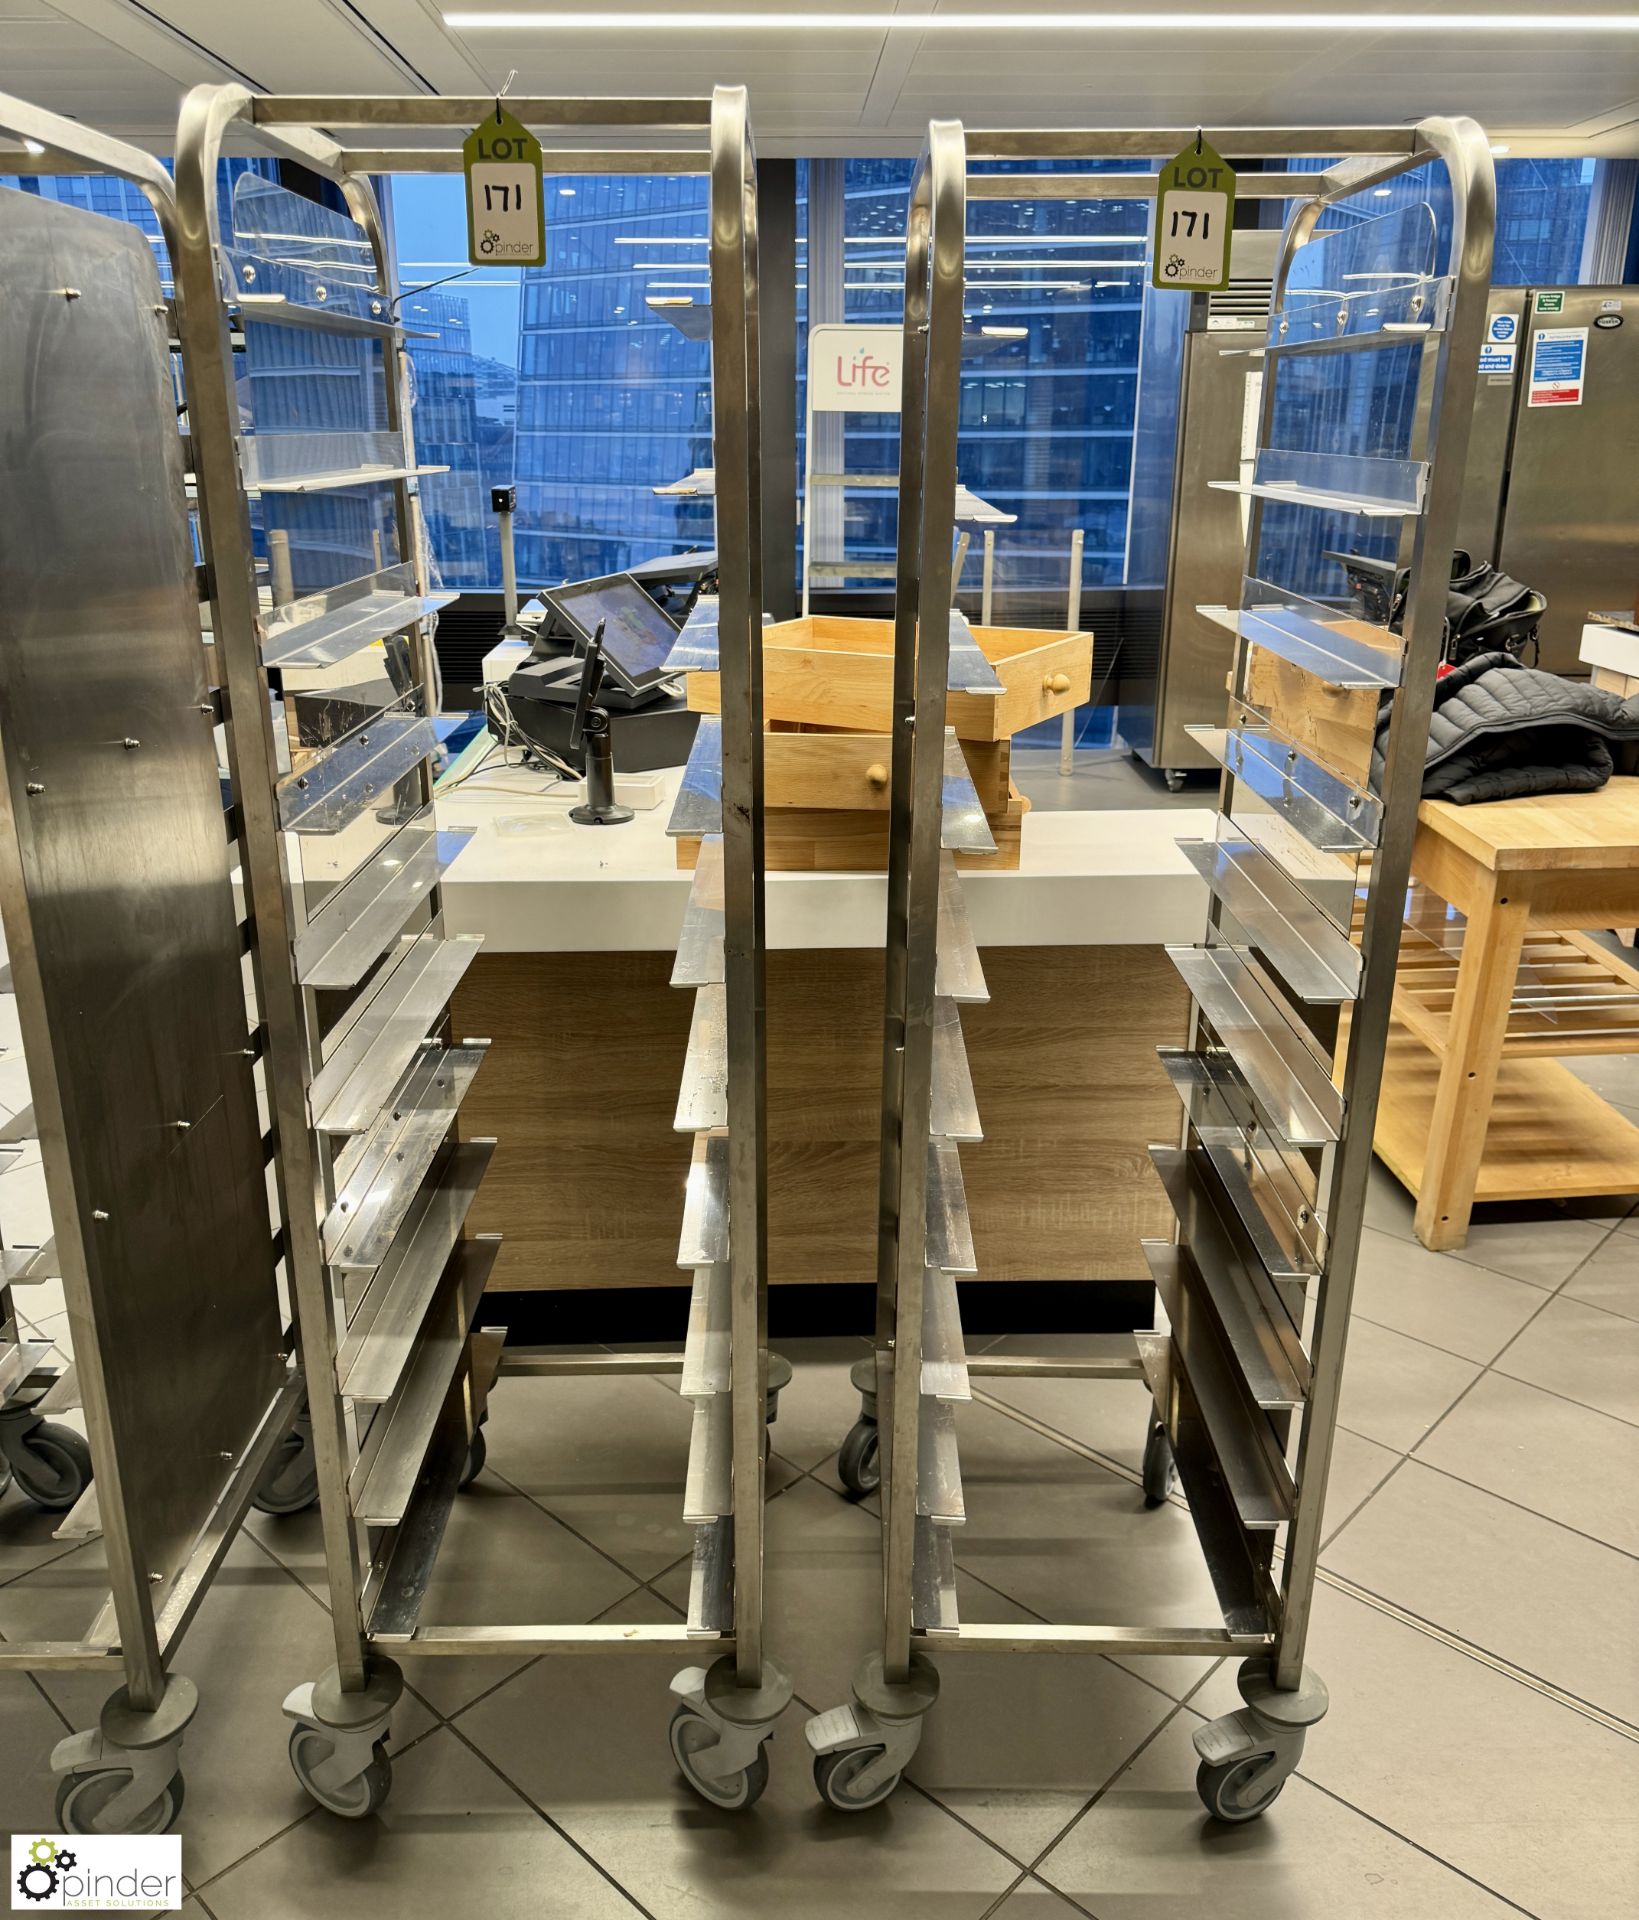 2 stainless steel 10-tray Trolleys (location in building - level 11 main canteen)